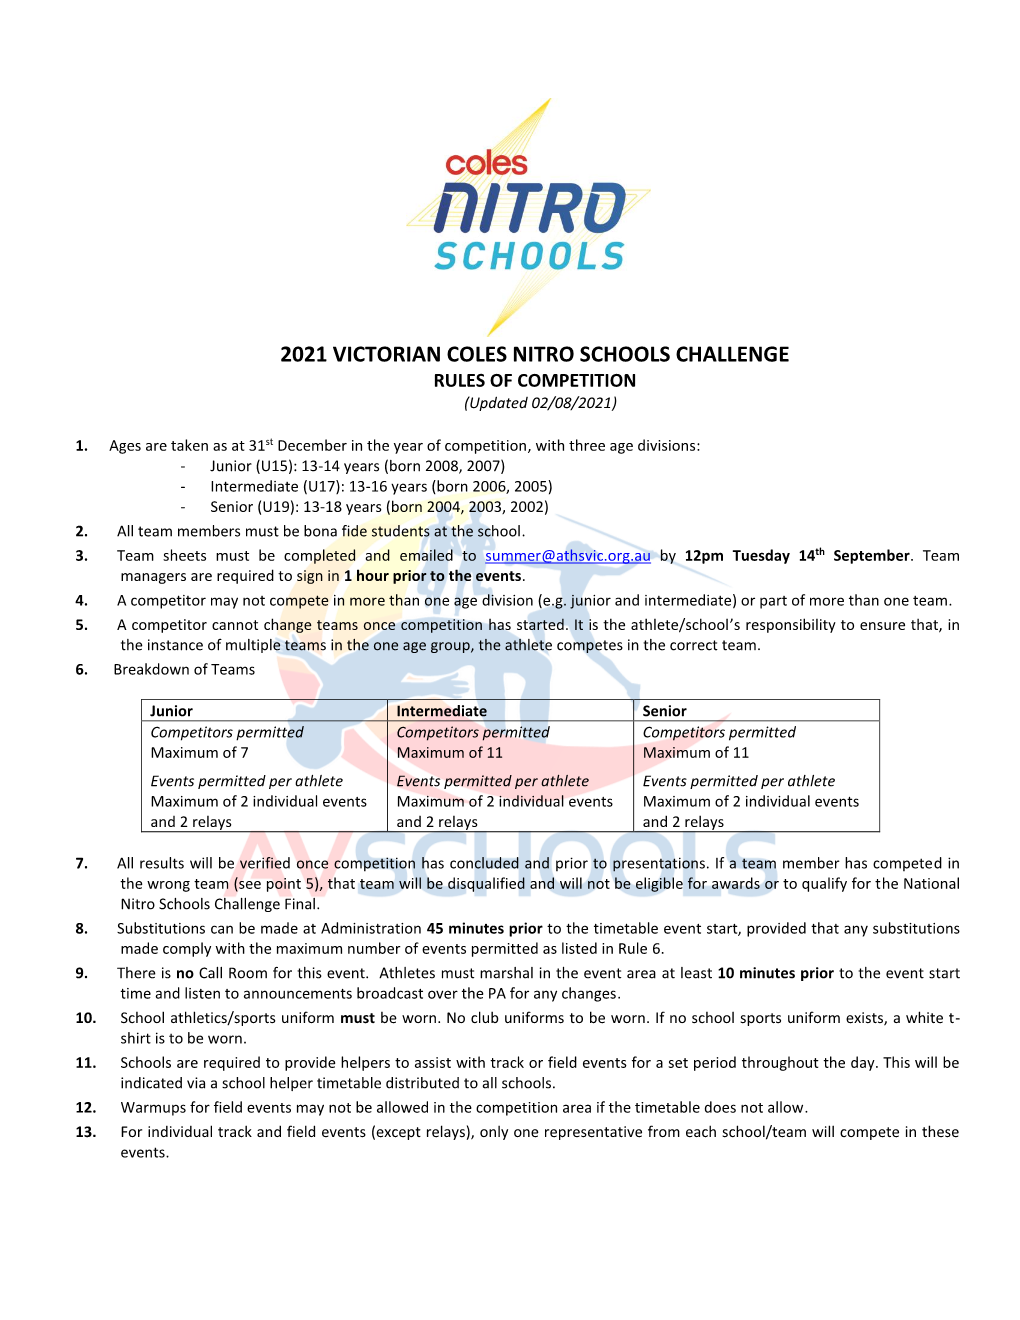 2021 VICTORIAN COLES NITRO SCHOOLS CHALLENGE RULES of COMPETITION (Updated 02/08/2021)